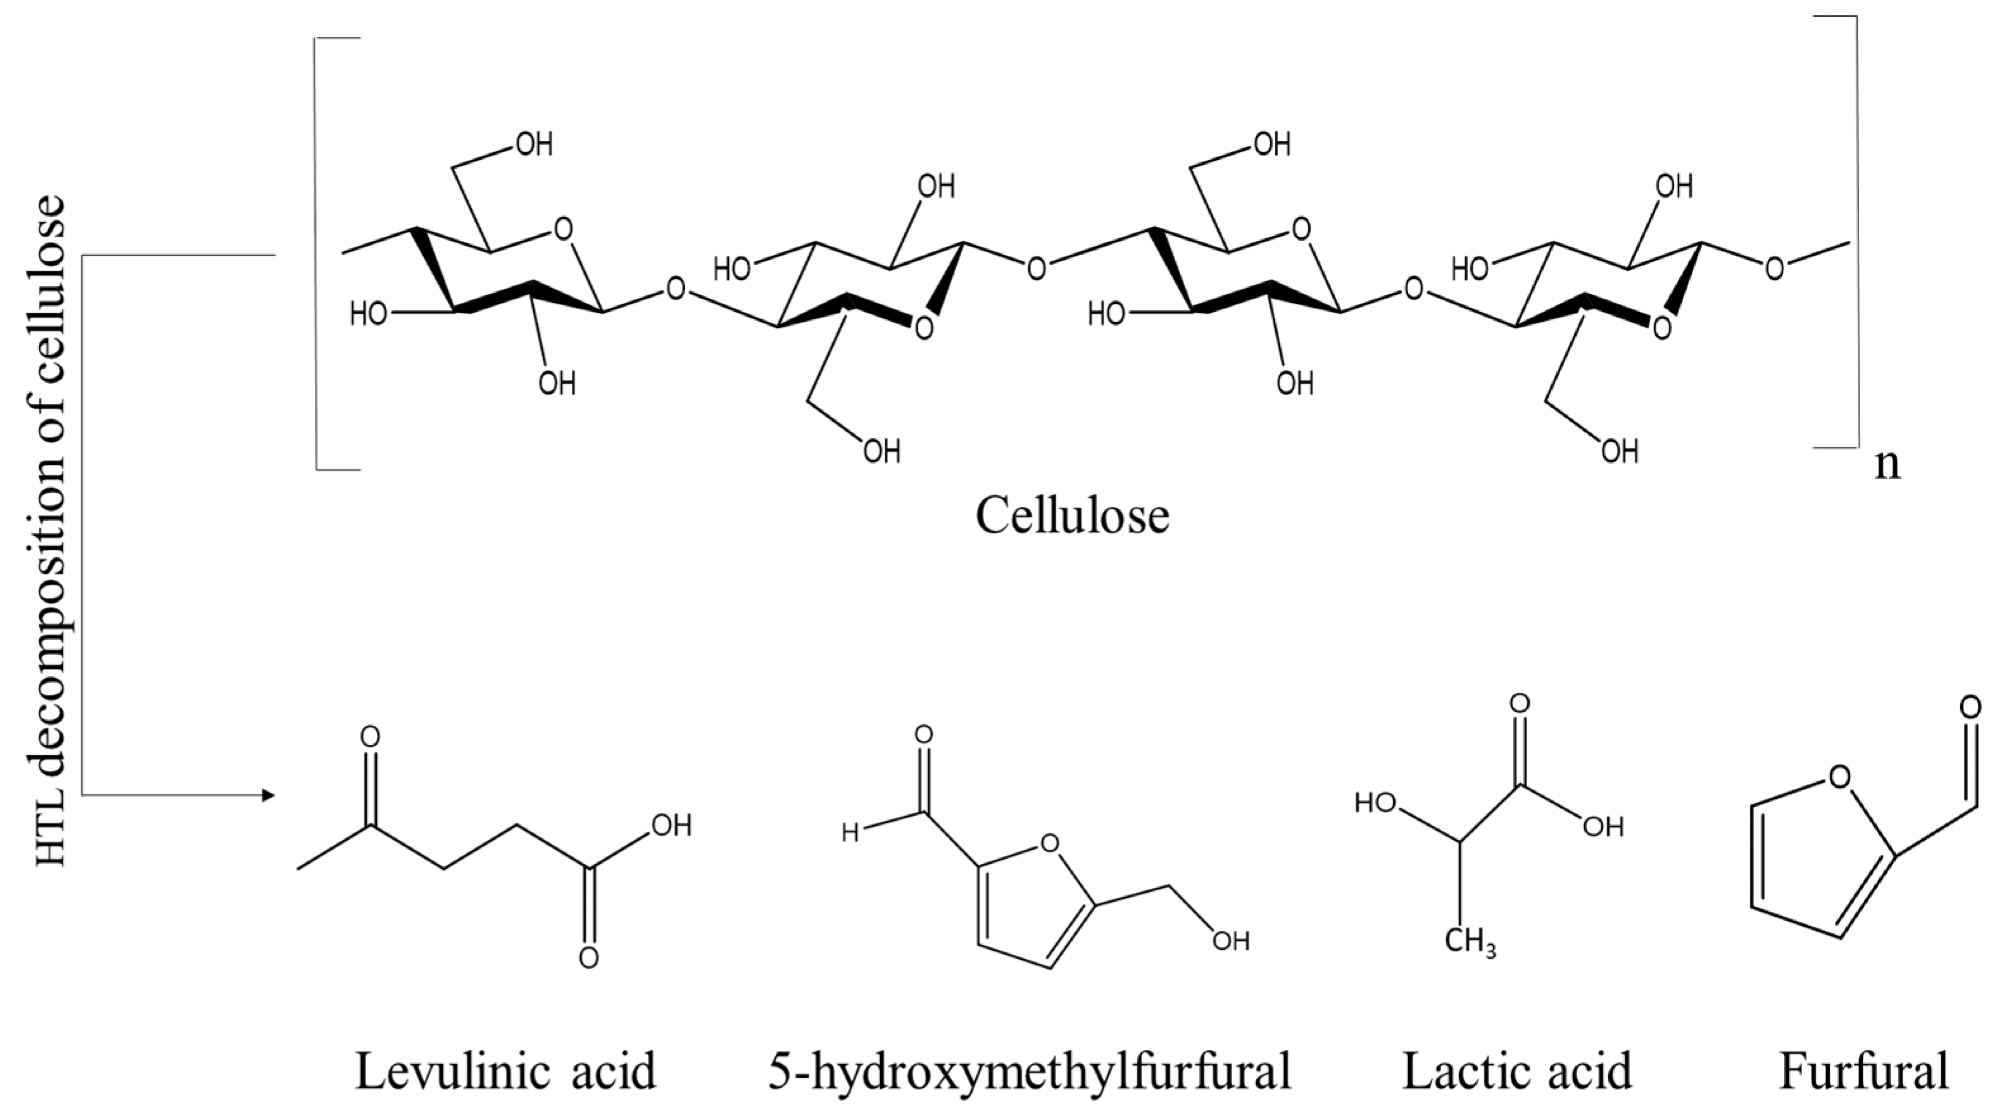 Decomposition products during cellulose liquefaction.